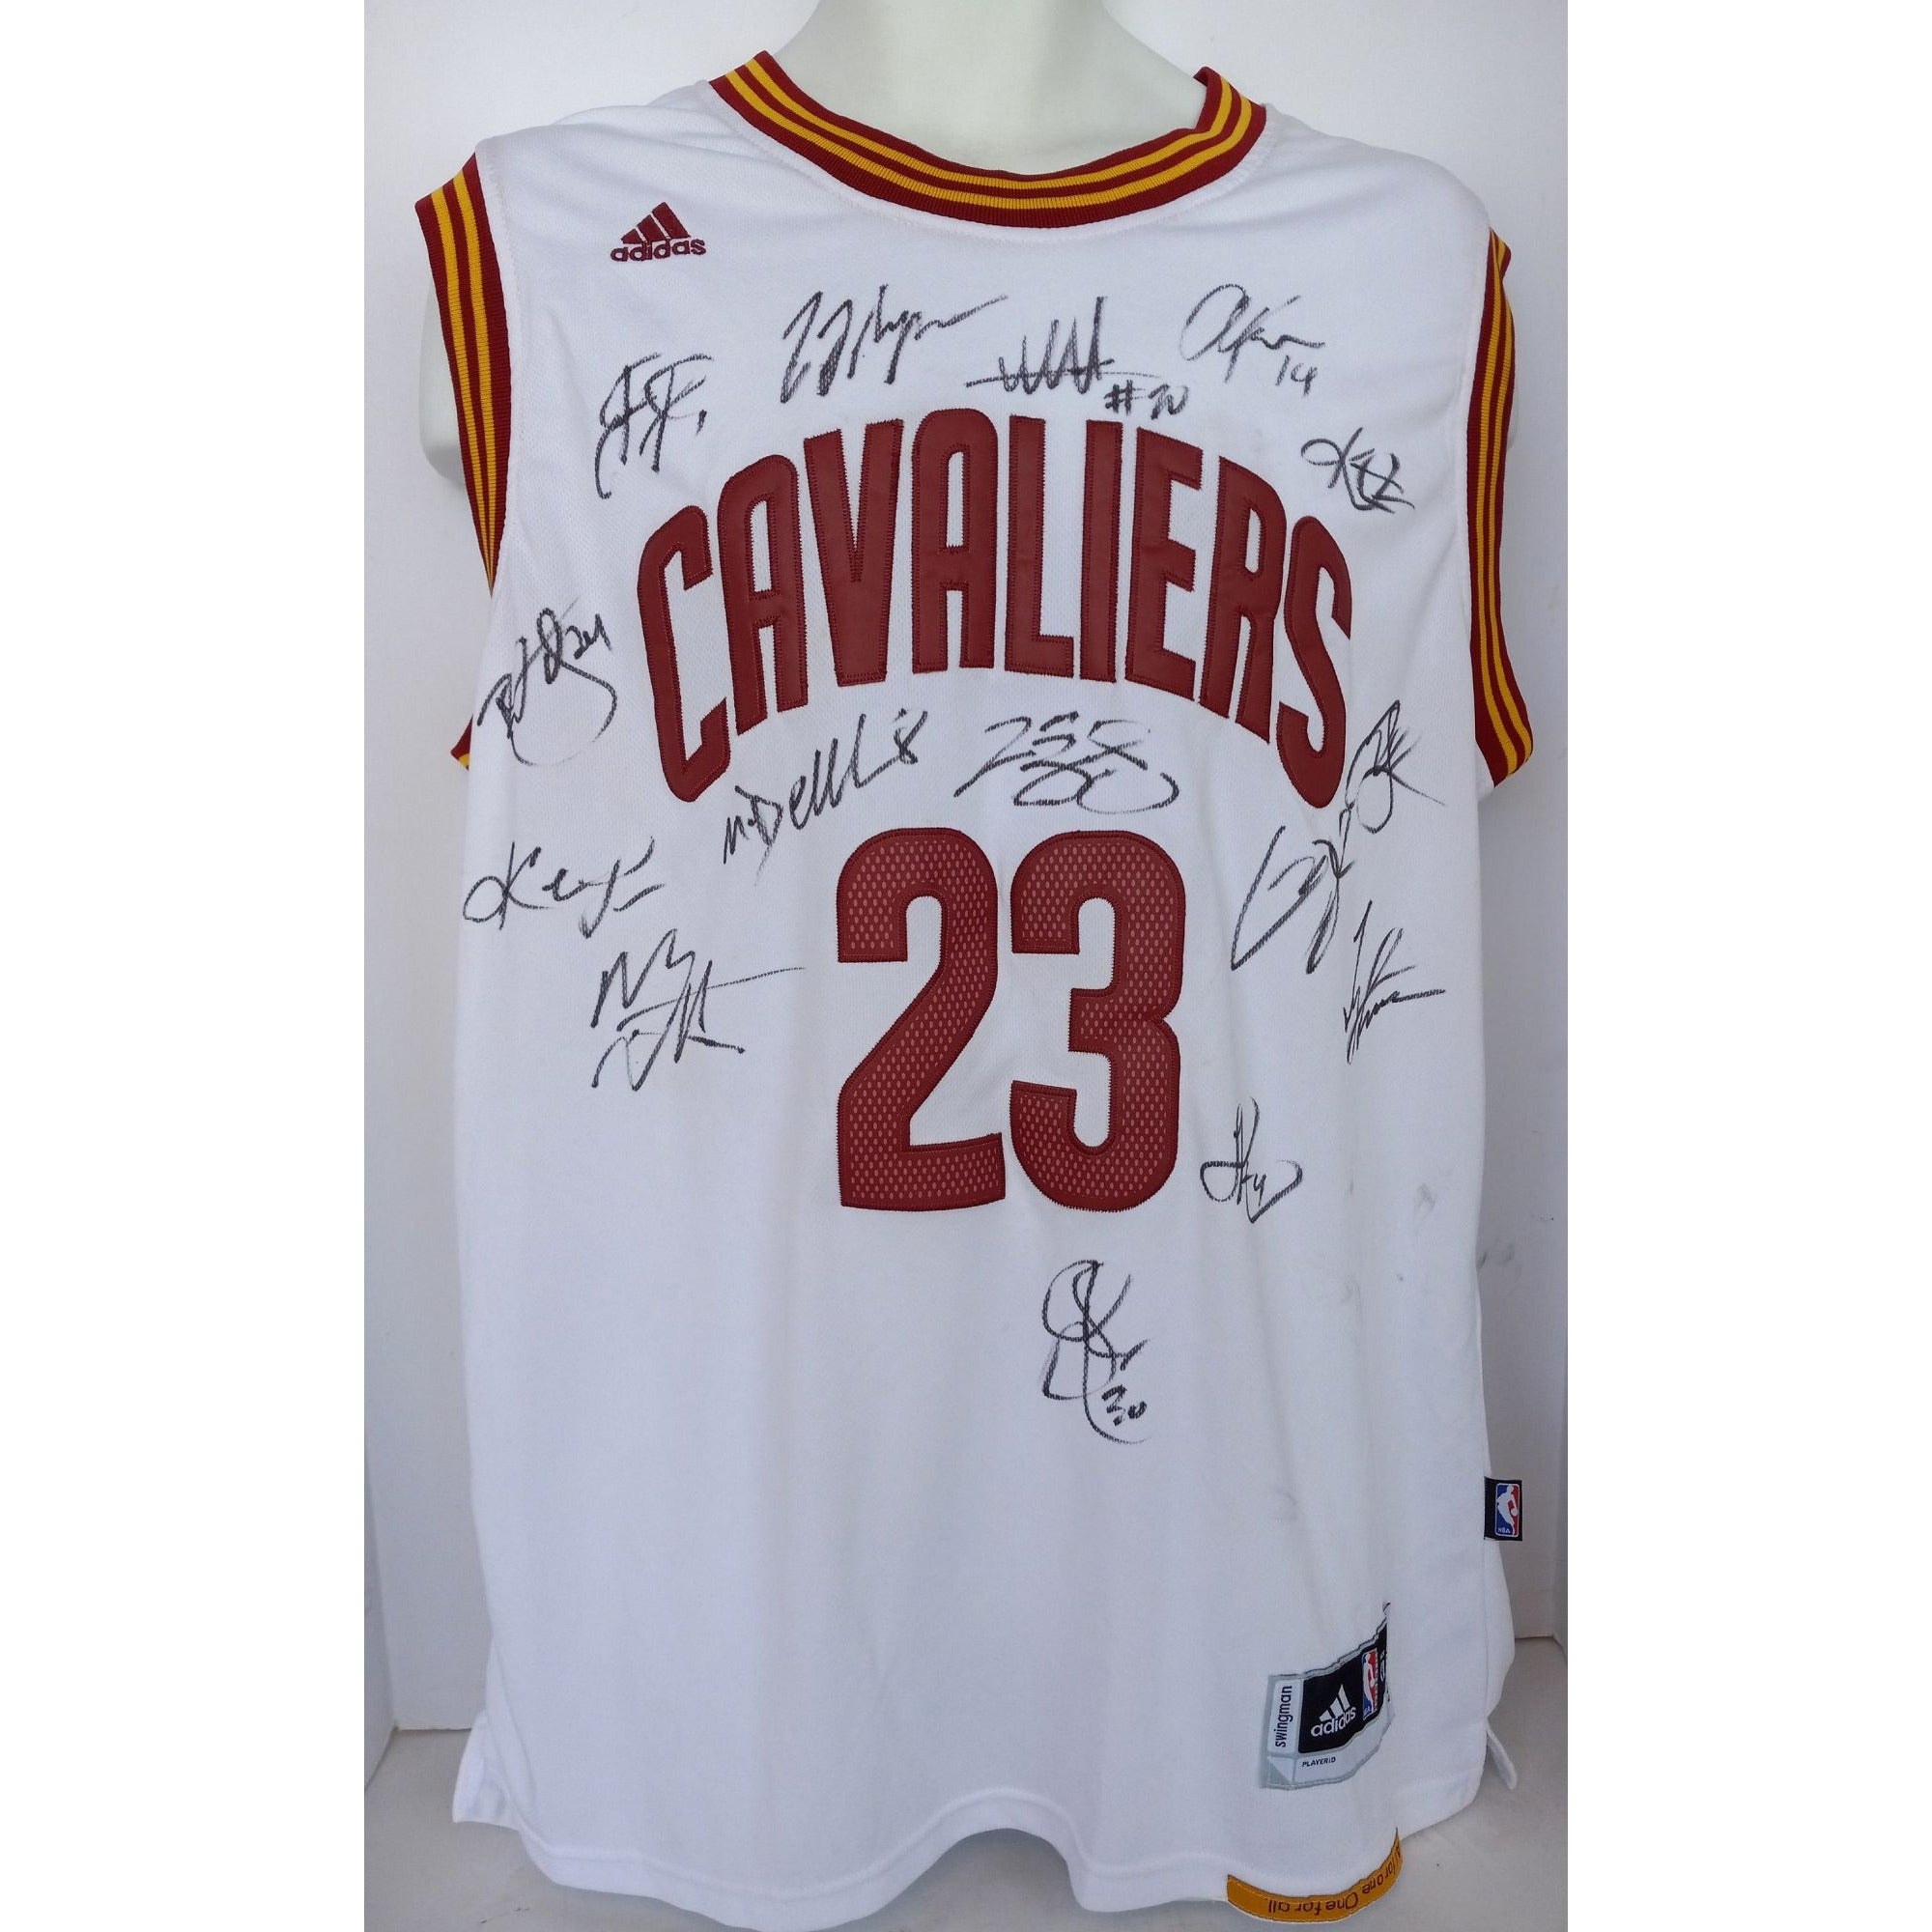 Are These the Cleveland Cavaliers' New Pride Jerseys for 2015-16 Season?, News, Scores, Highlights, Stats, and Rumors